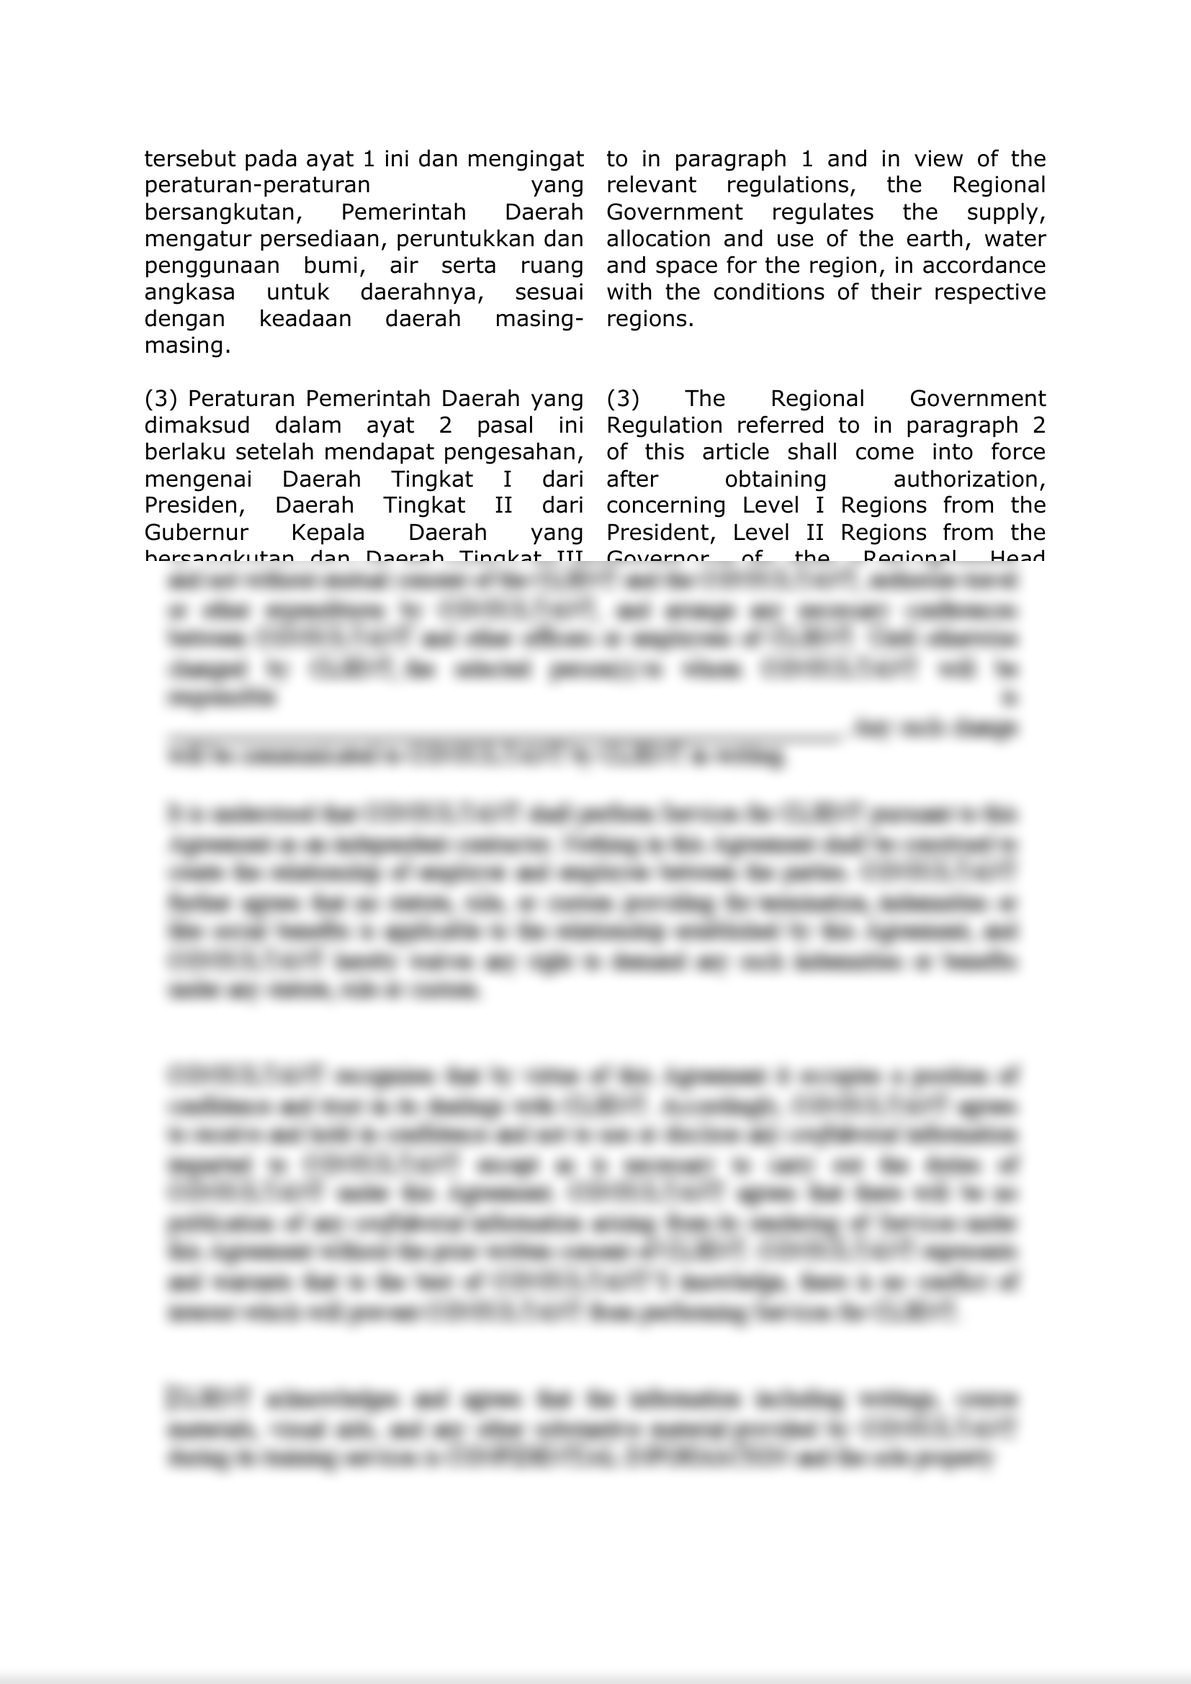 Law of the Republic of Indonesia Number: 5 of 1960 Concerning Basic Regulations on Agrarian Principles-6